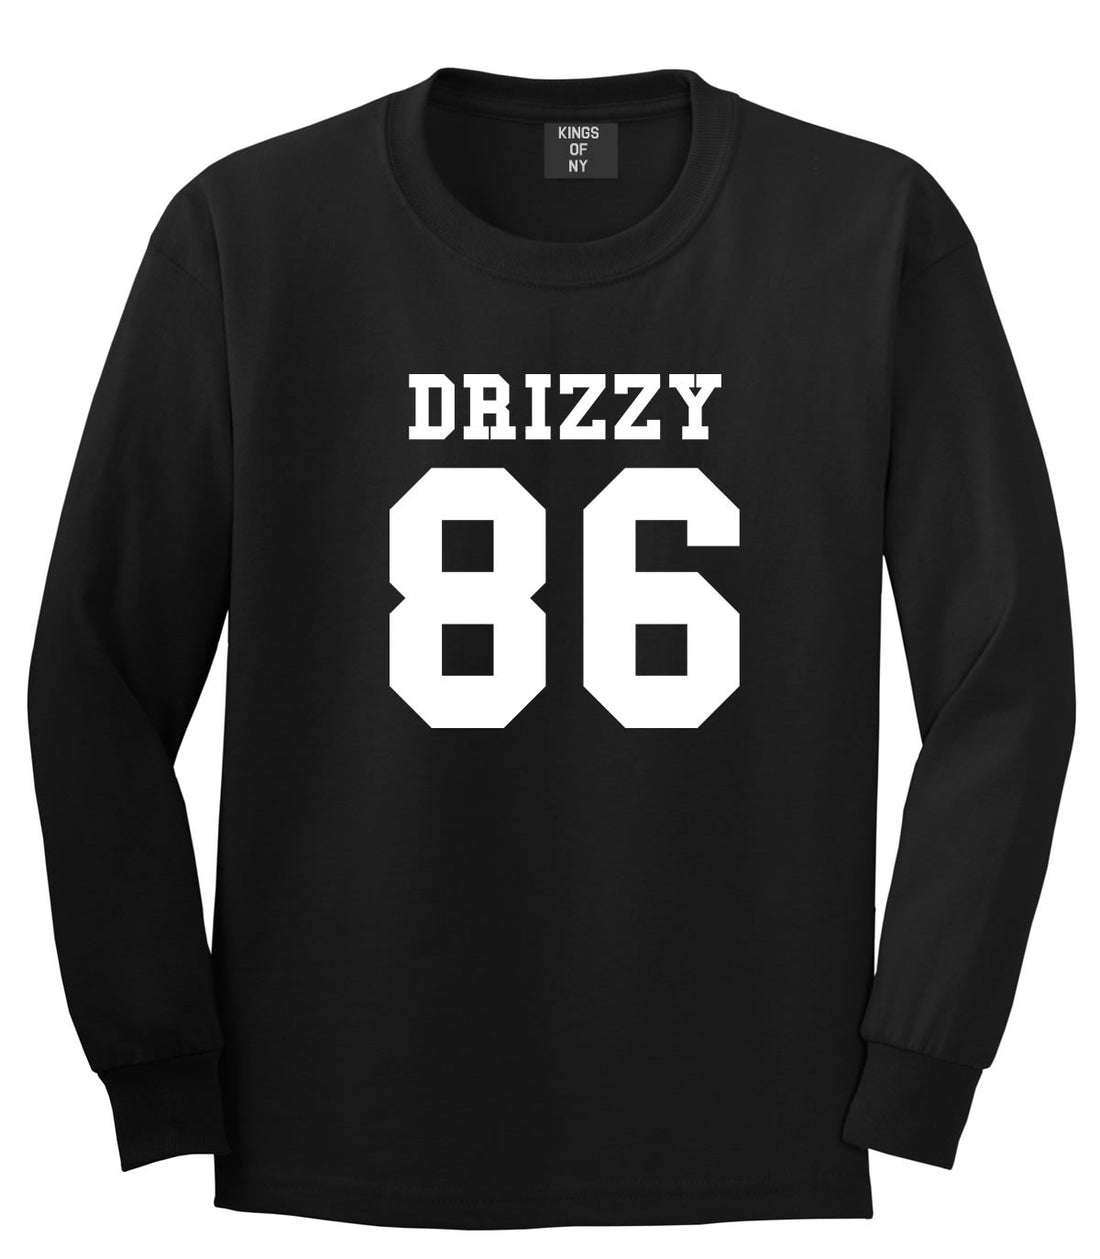 Drizzy 86 Team Jersey Long Sleeve T-Shirt in Black by Kings Of NY